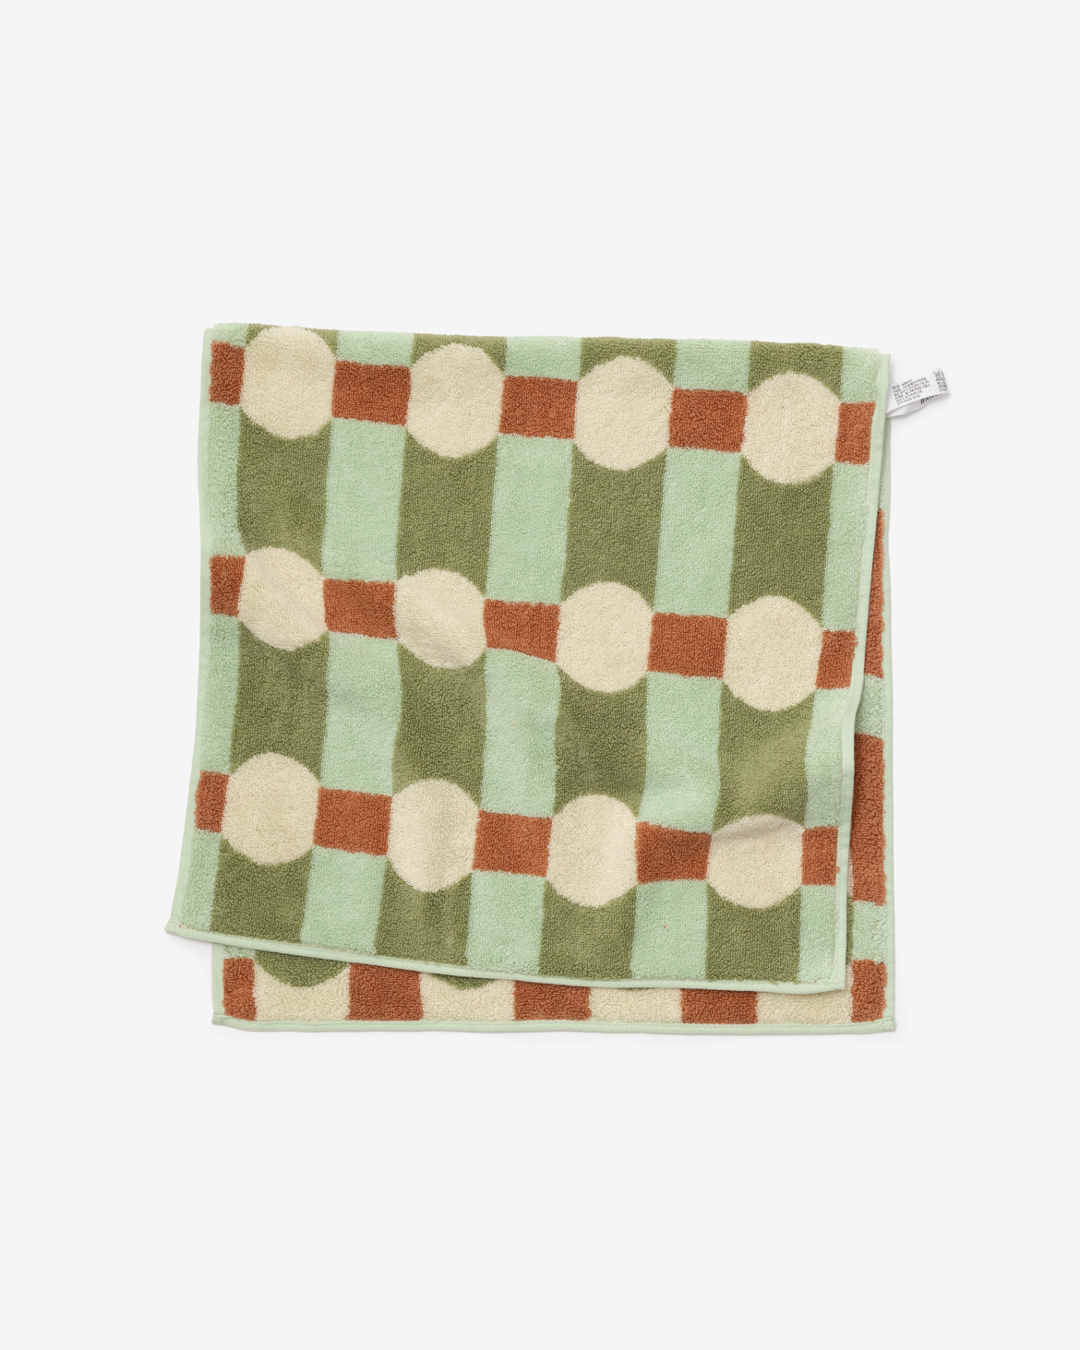 DOT CHECK FACE TOWEL - CREAM ON MINT